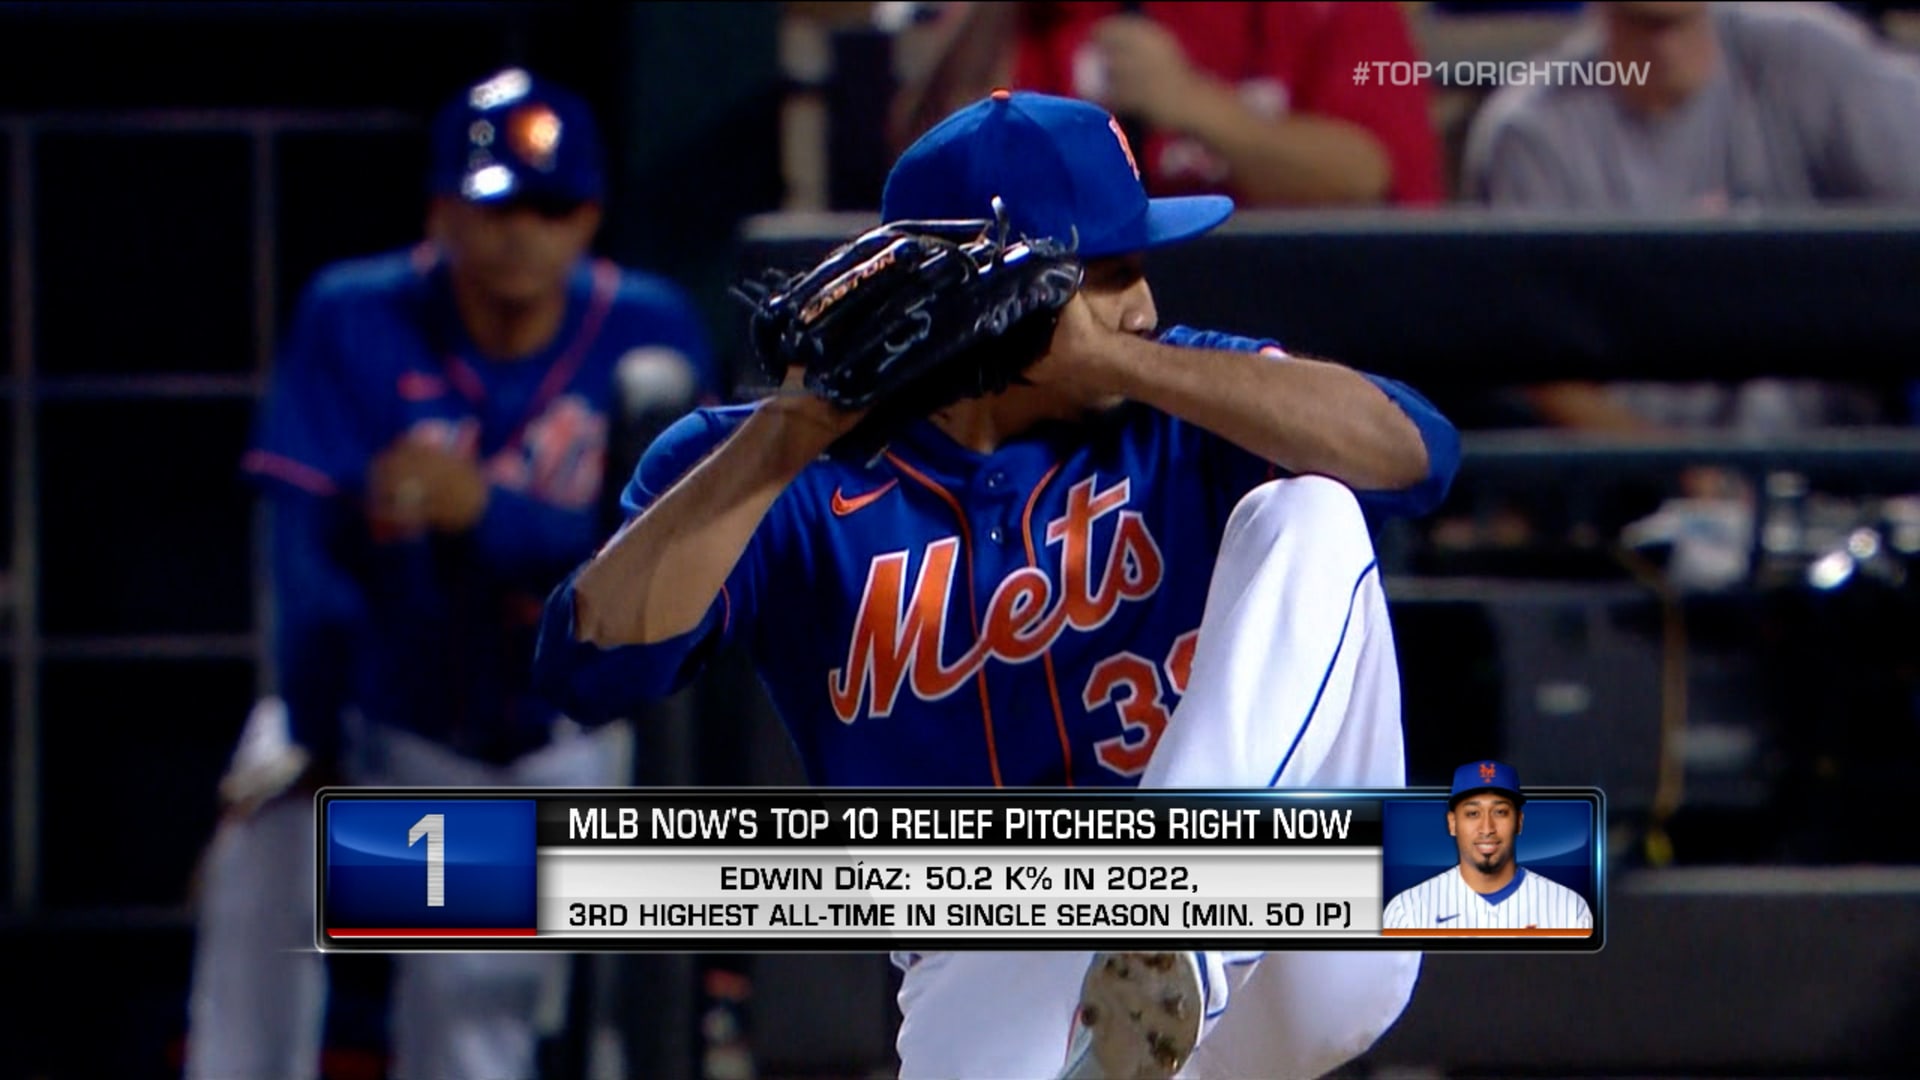 Top 10 Right Now - Relief Pitchers, relief pitcher